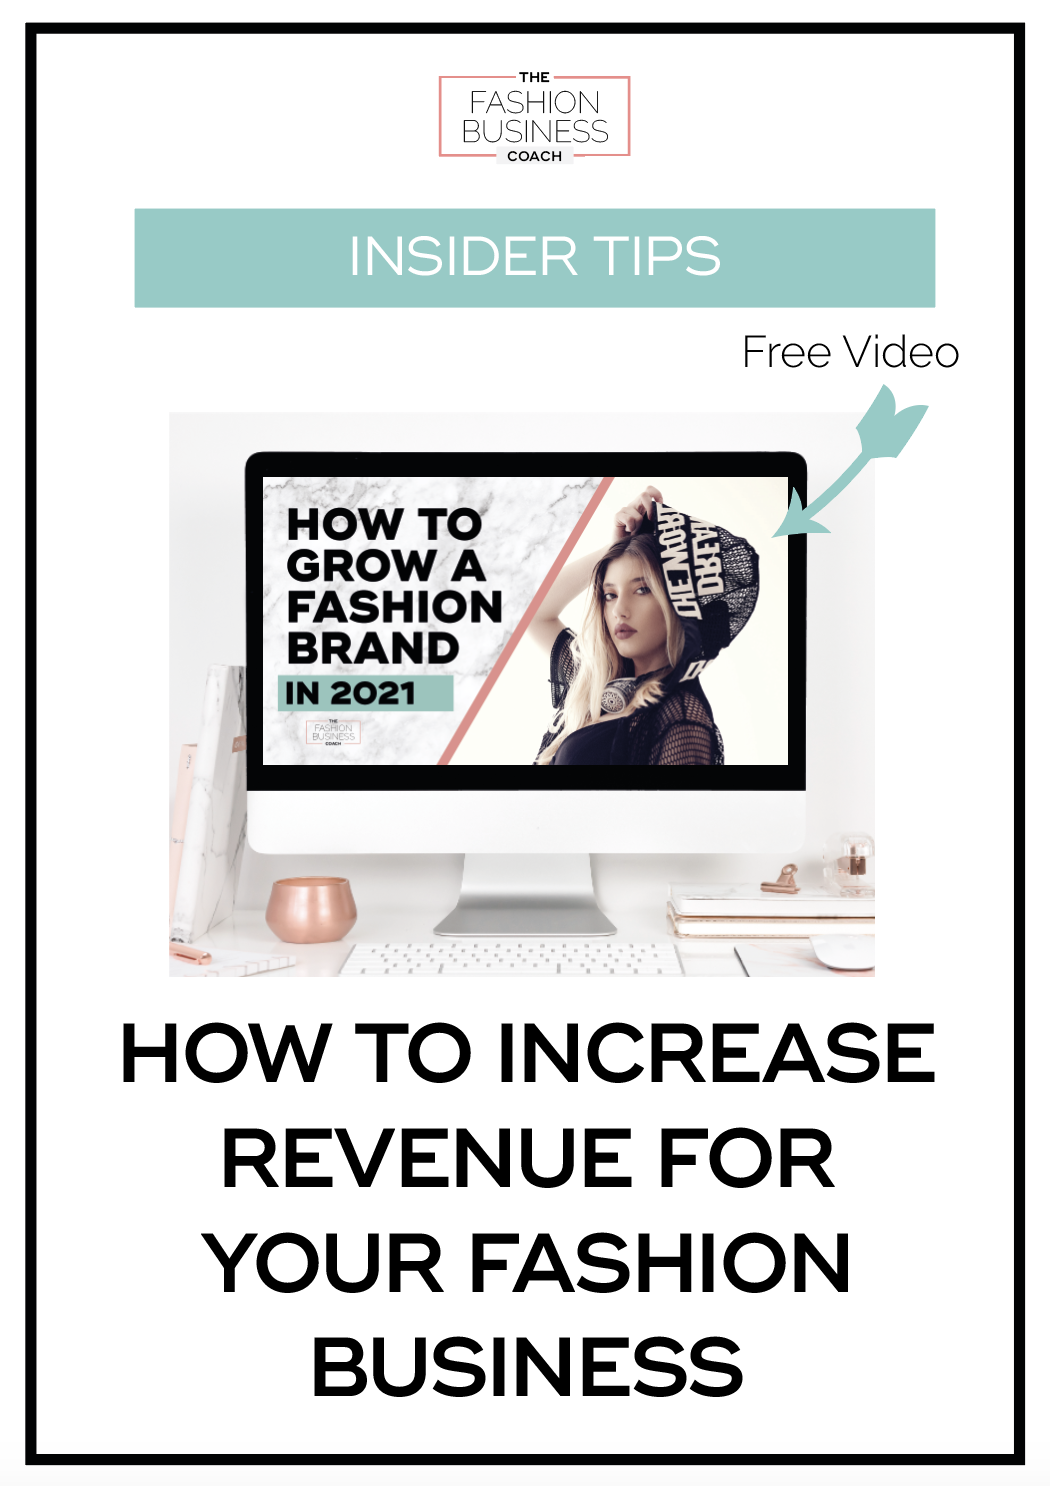 How to Increase Revenue for Your Fashion Business 3.png